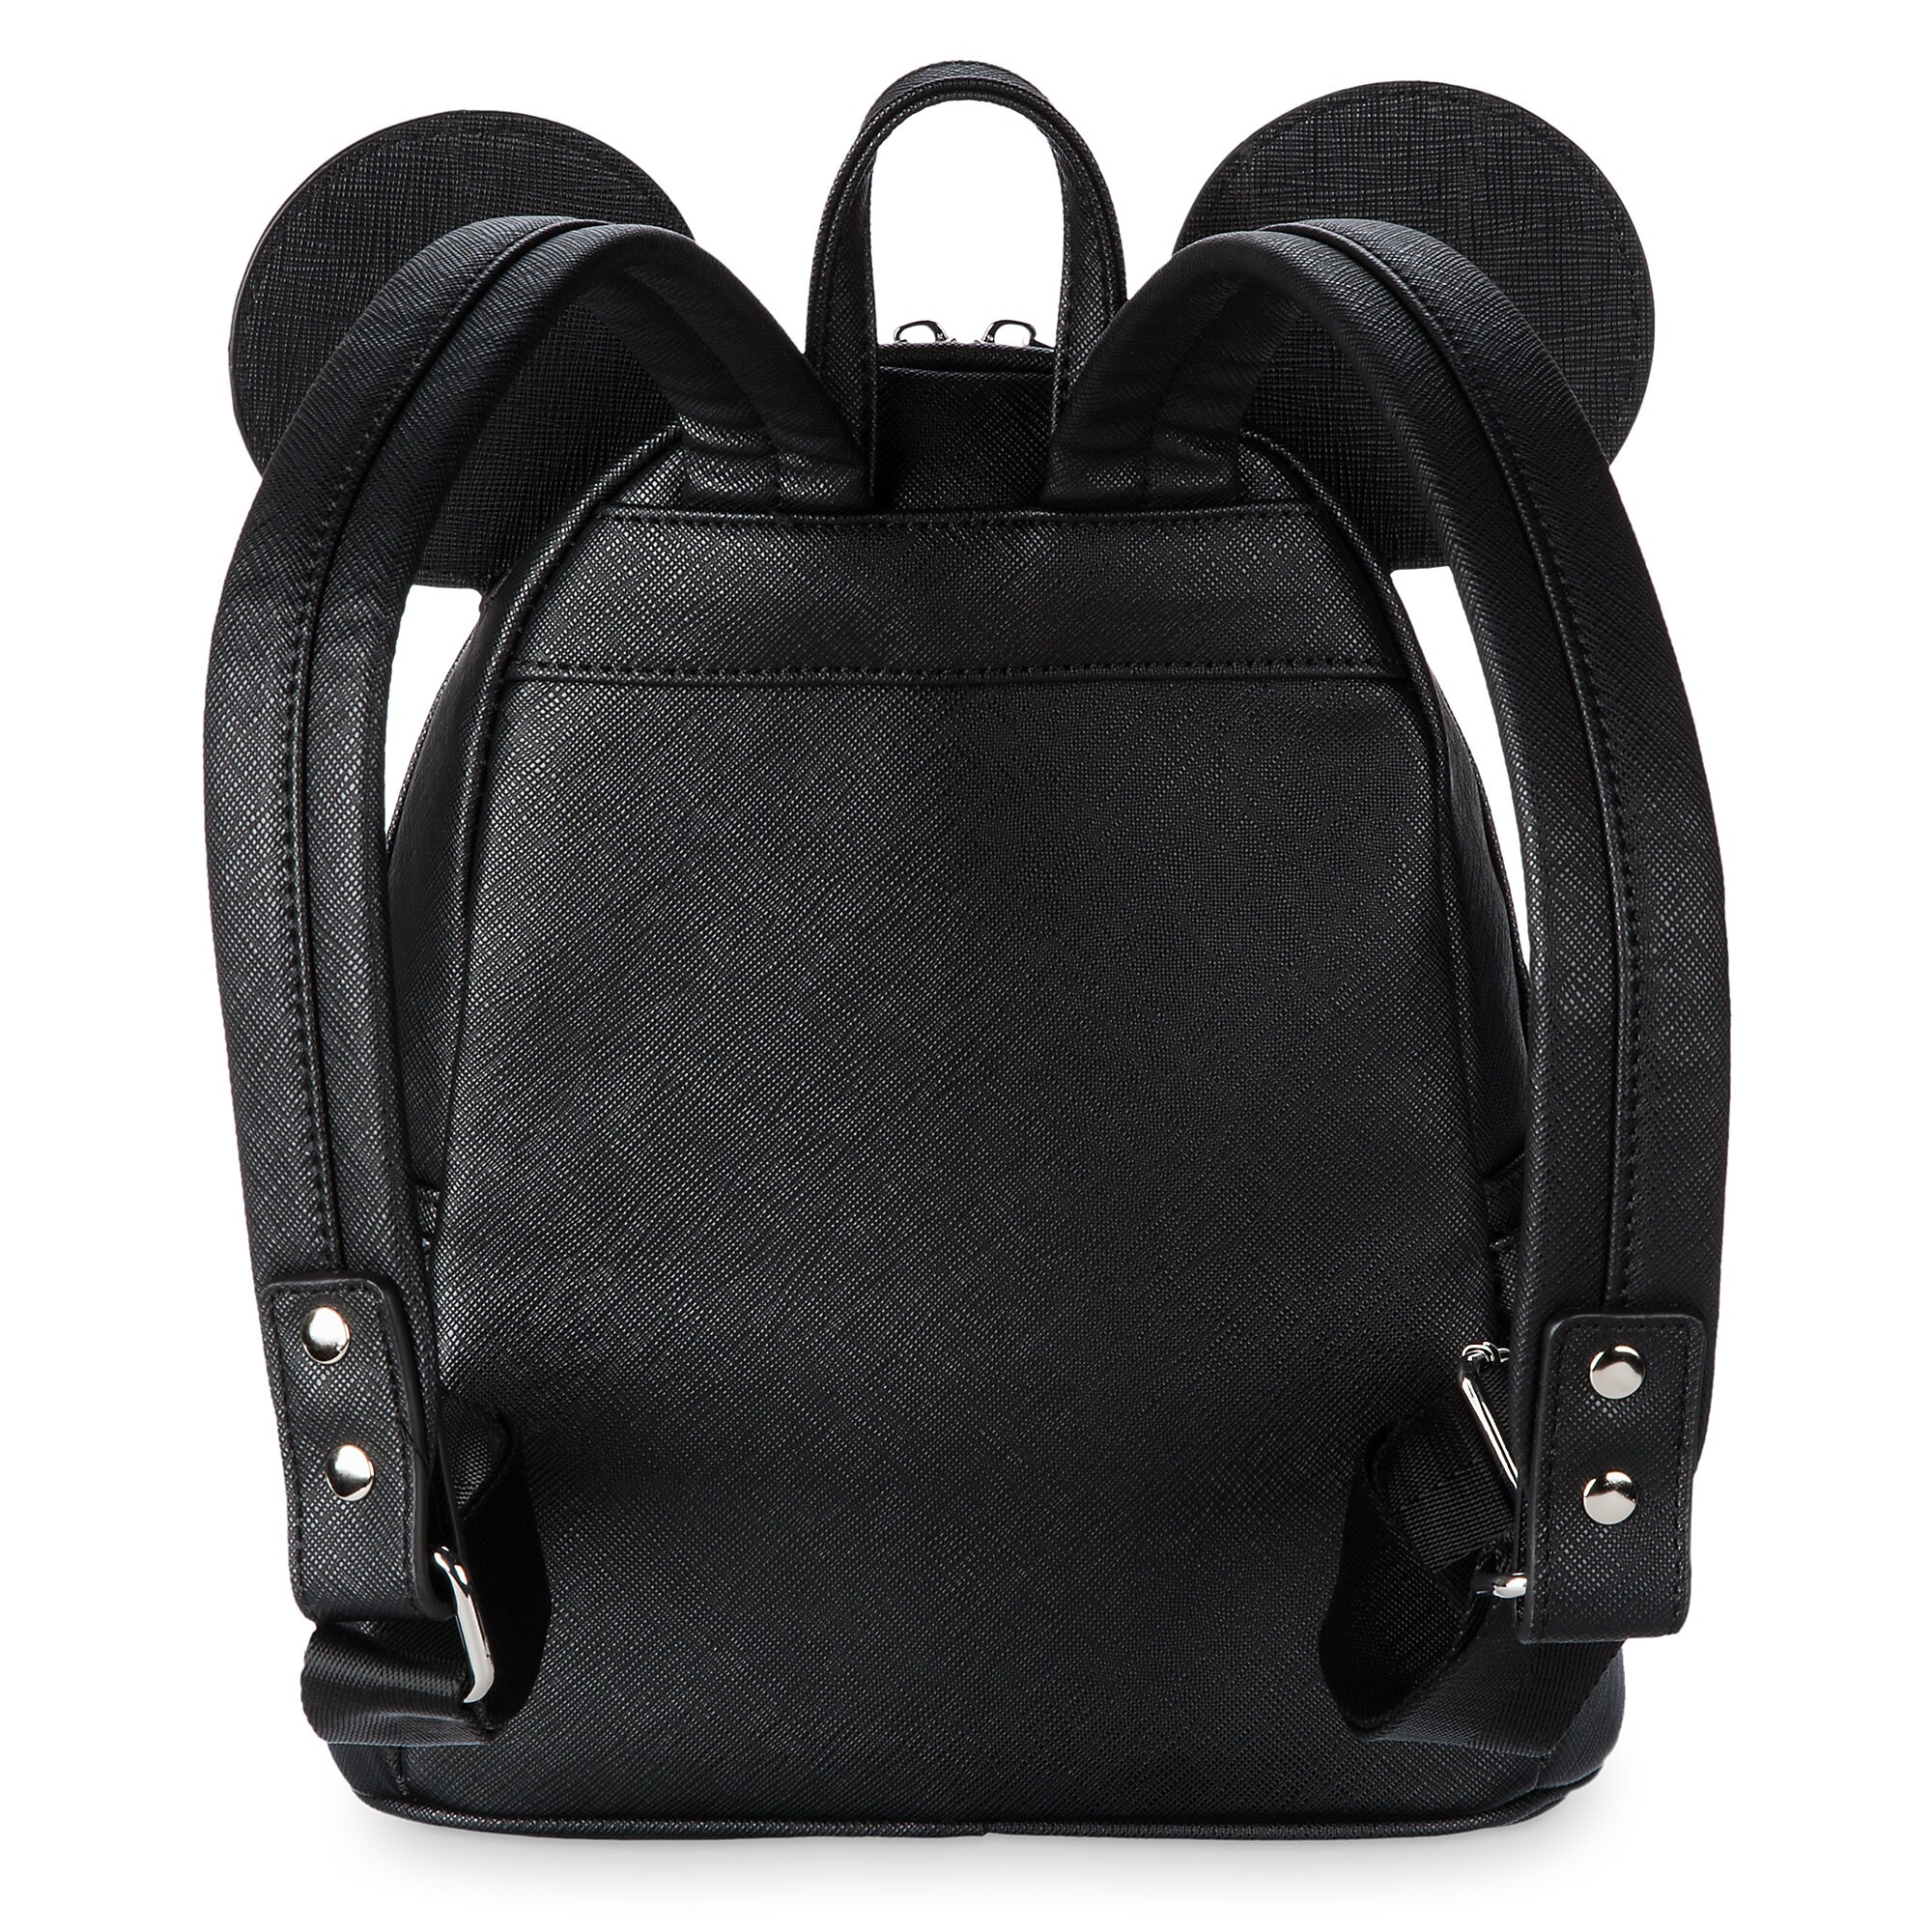 Mickey Mouse Mini Backpack by Loungefly